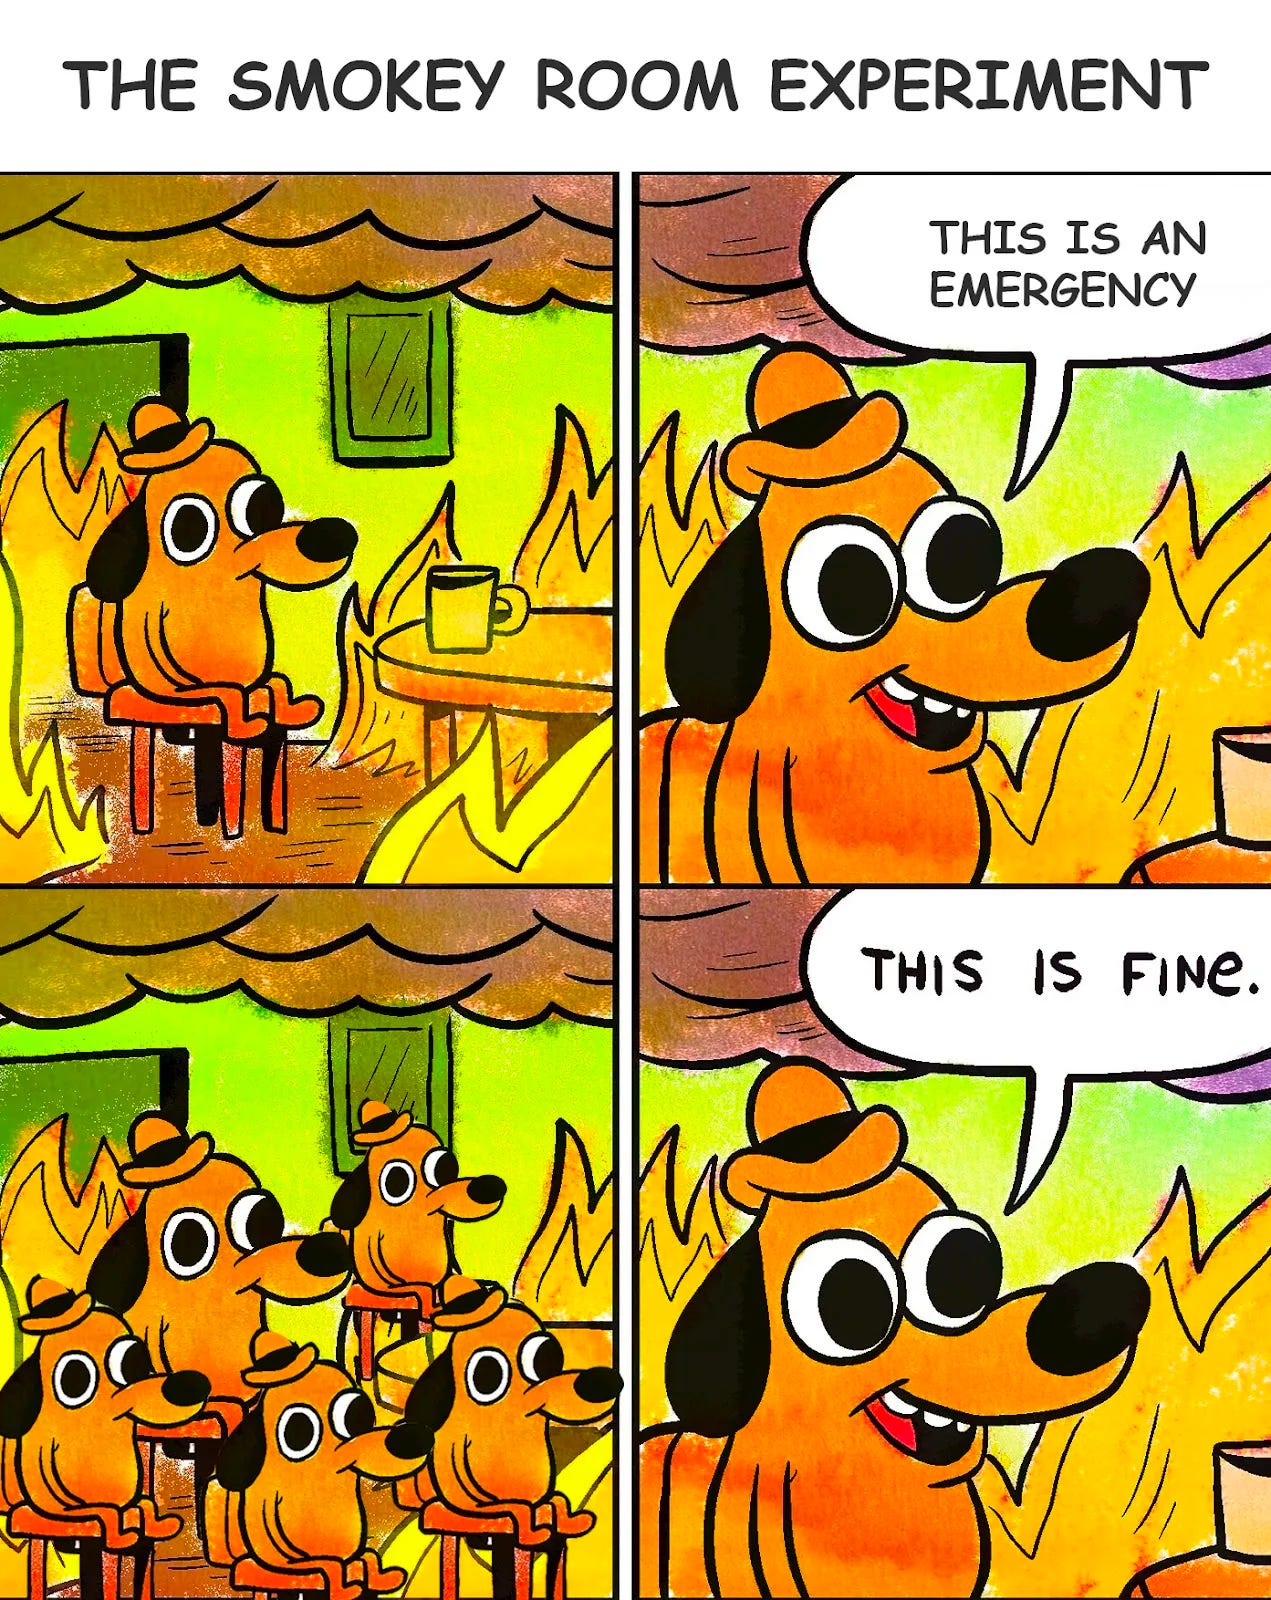 Meme format, with the header “The Smokey Room Experiment”. On the top half there are two panels. On the left, we see a dog calmly sitting with a cup of tea in a room that is clearly on fire. The second panel on the top shows the dog saying “This is an emergency”.  The bottom half shows the same dog surrounded by others sitting with him. In the next panel, it zooms in on our friendly dog saying “This is fine”.